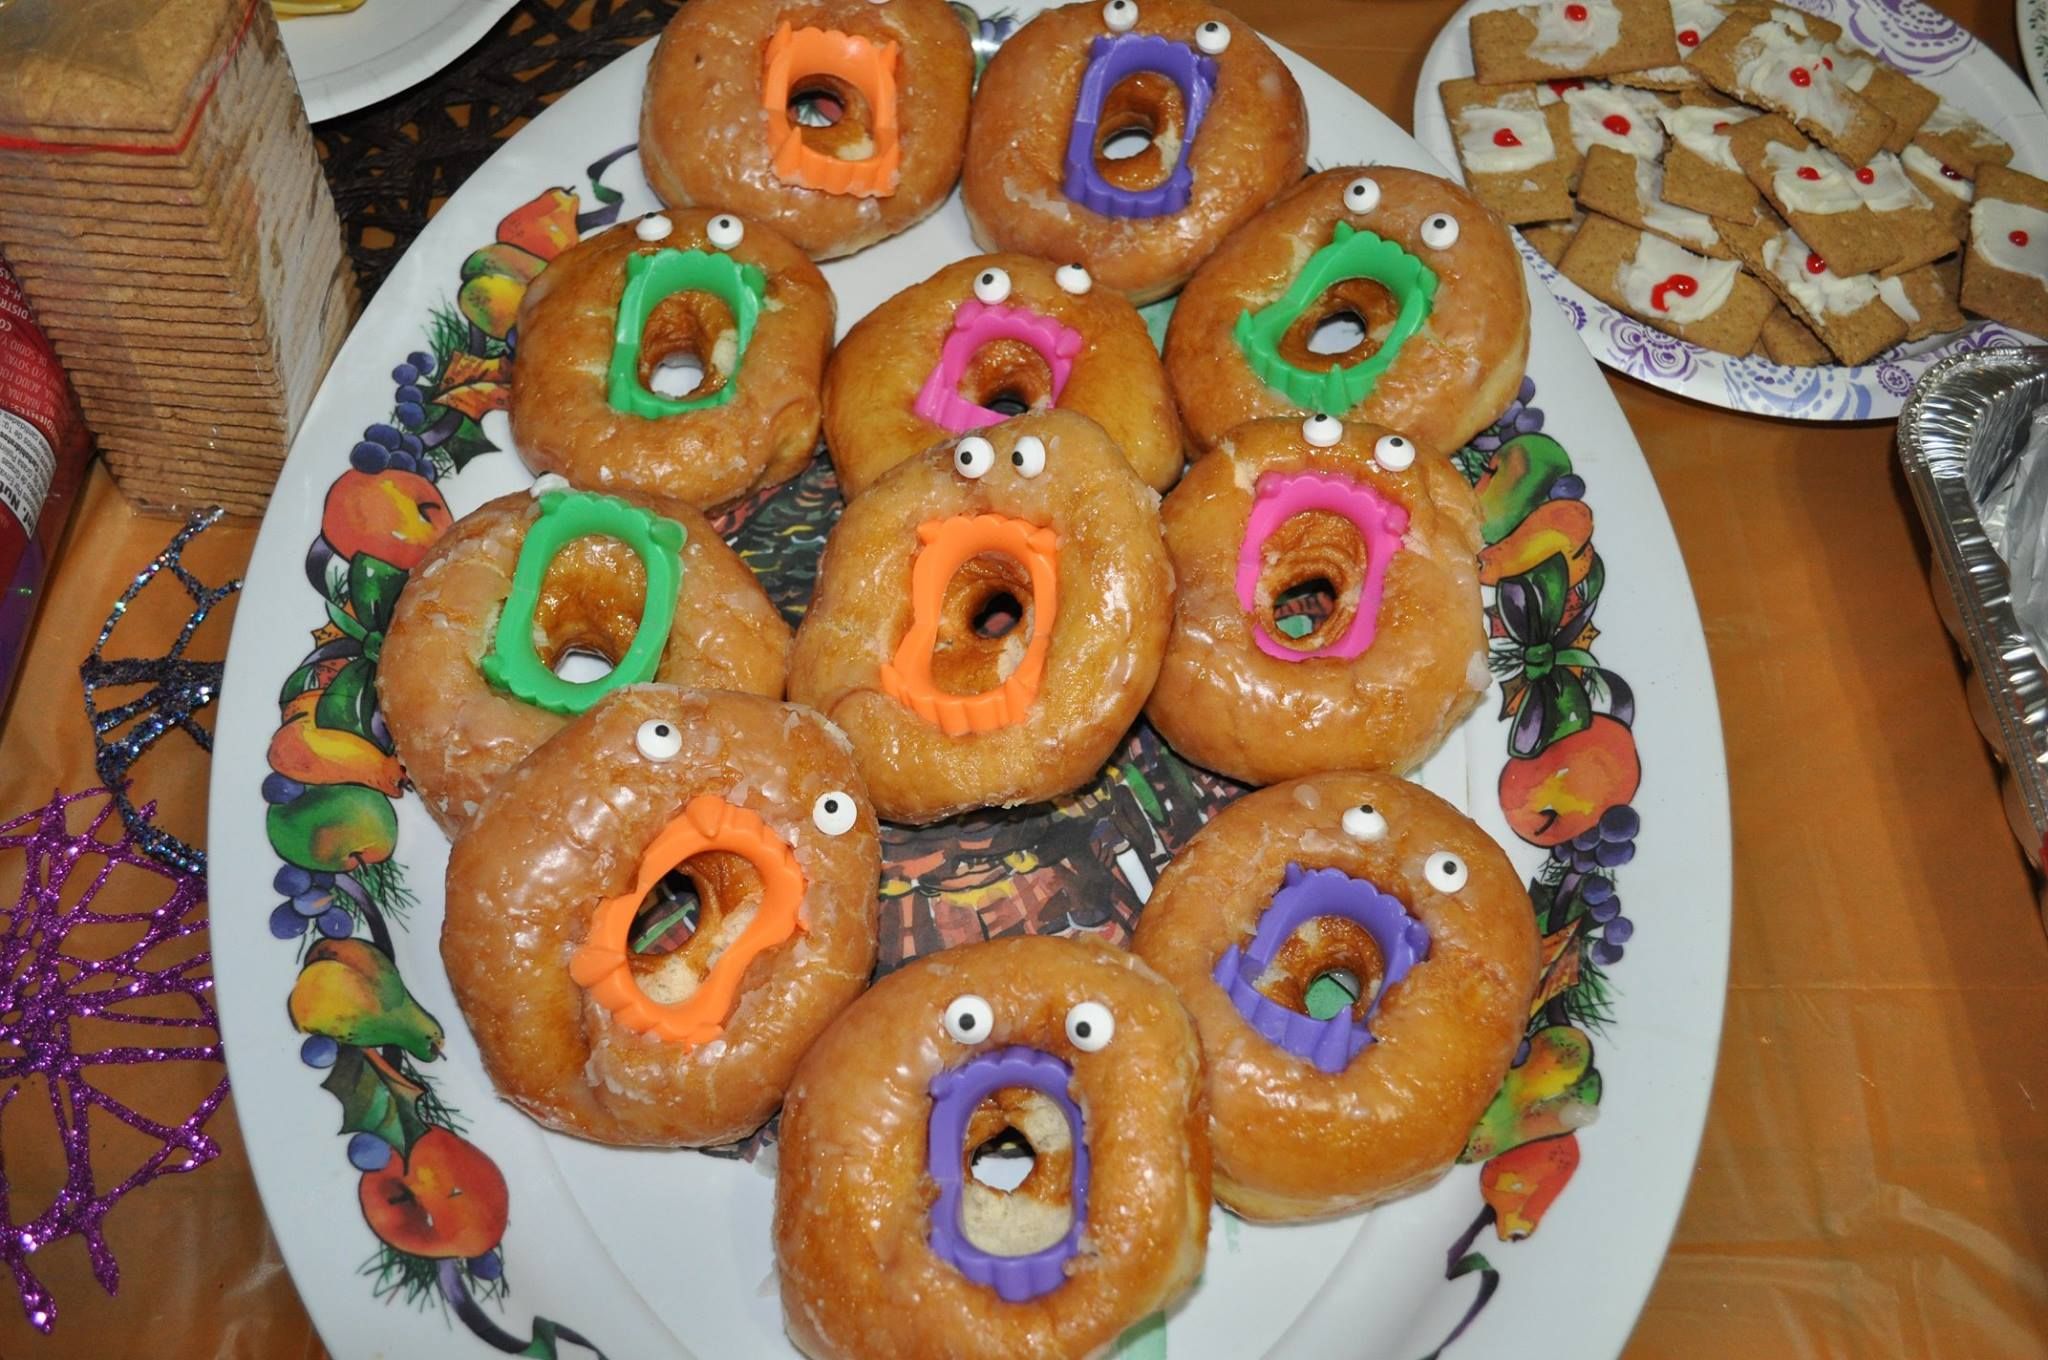 This is what happened when I made those 'vampire donuts' for Halloween last year.